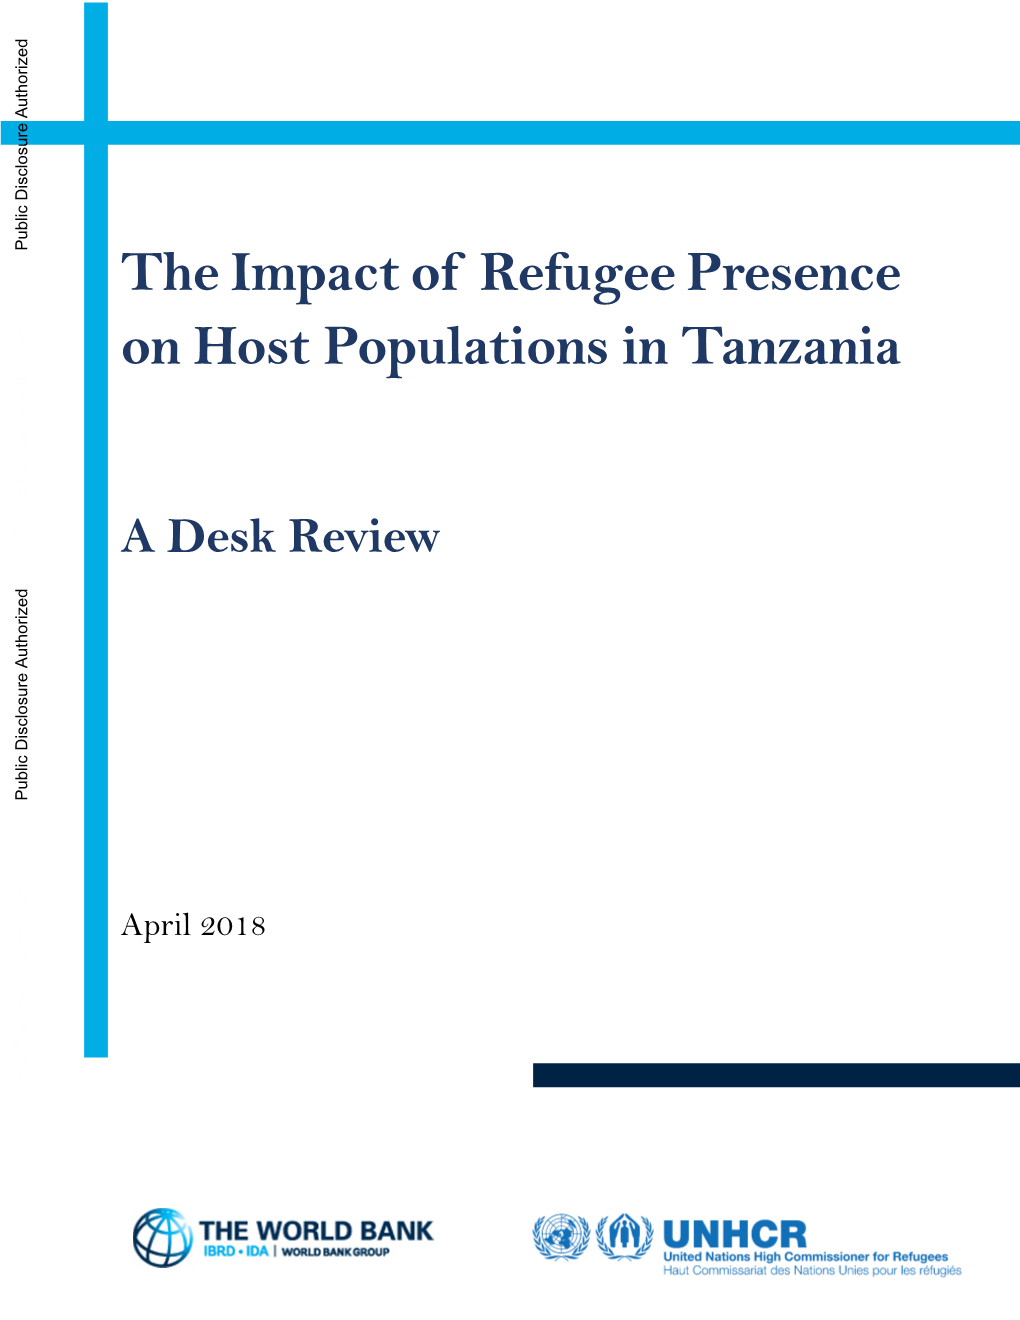 The Impact of Refugee Presence on Host Populations in Tanzania